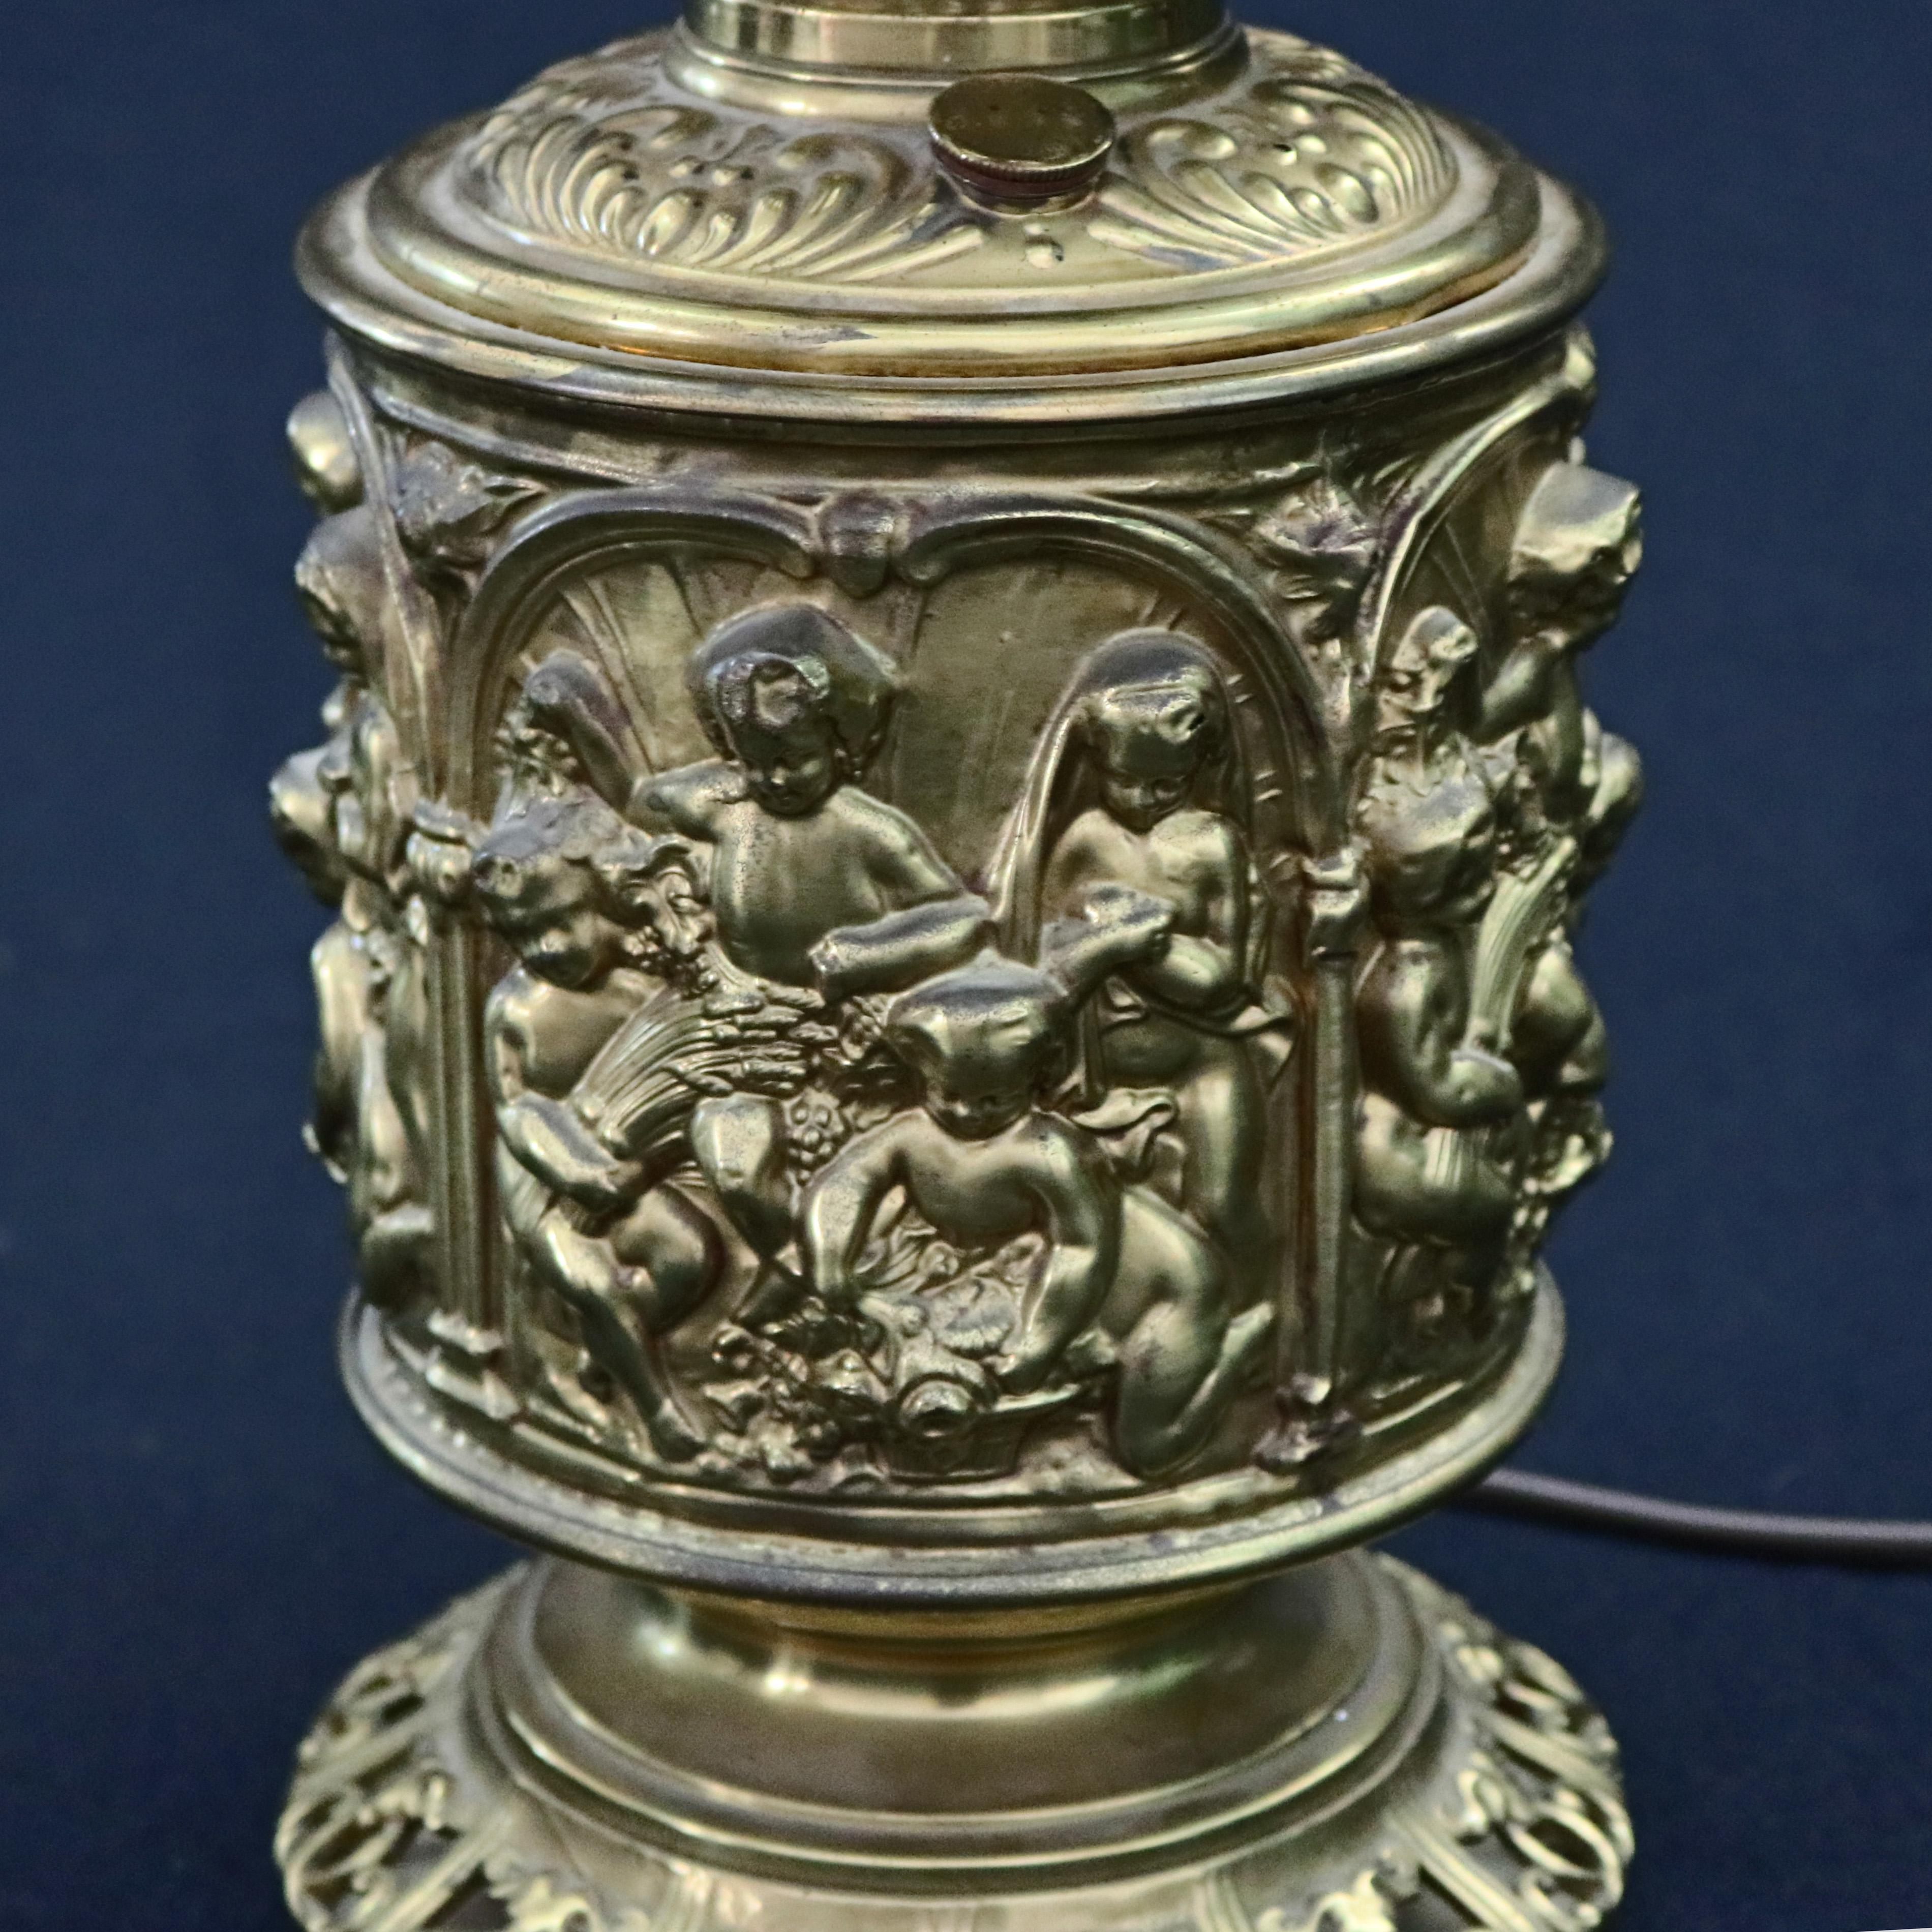 An antique gone with the wind parlor table lamp offers high relief embossed brass classical cherub scenes raised on pierced foot and surmounted by hand painted floral globe, electrified, 19th century

***DELIVERY NOTICE – Due to COVID-19 we are